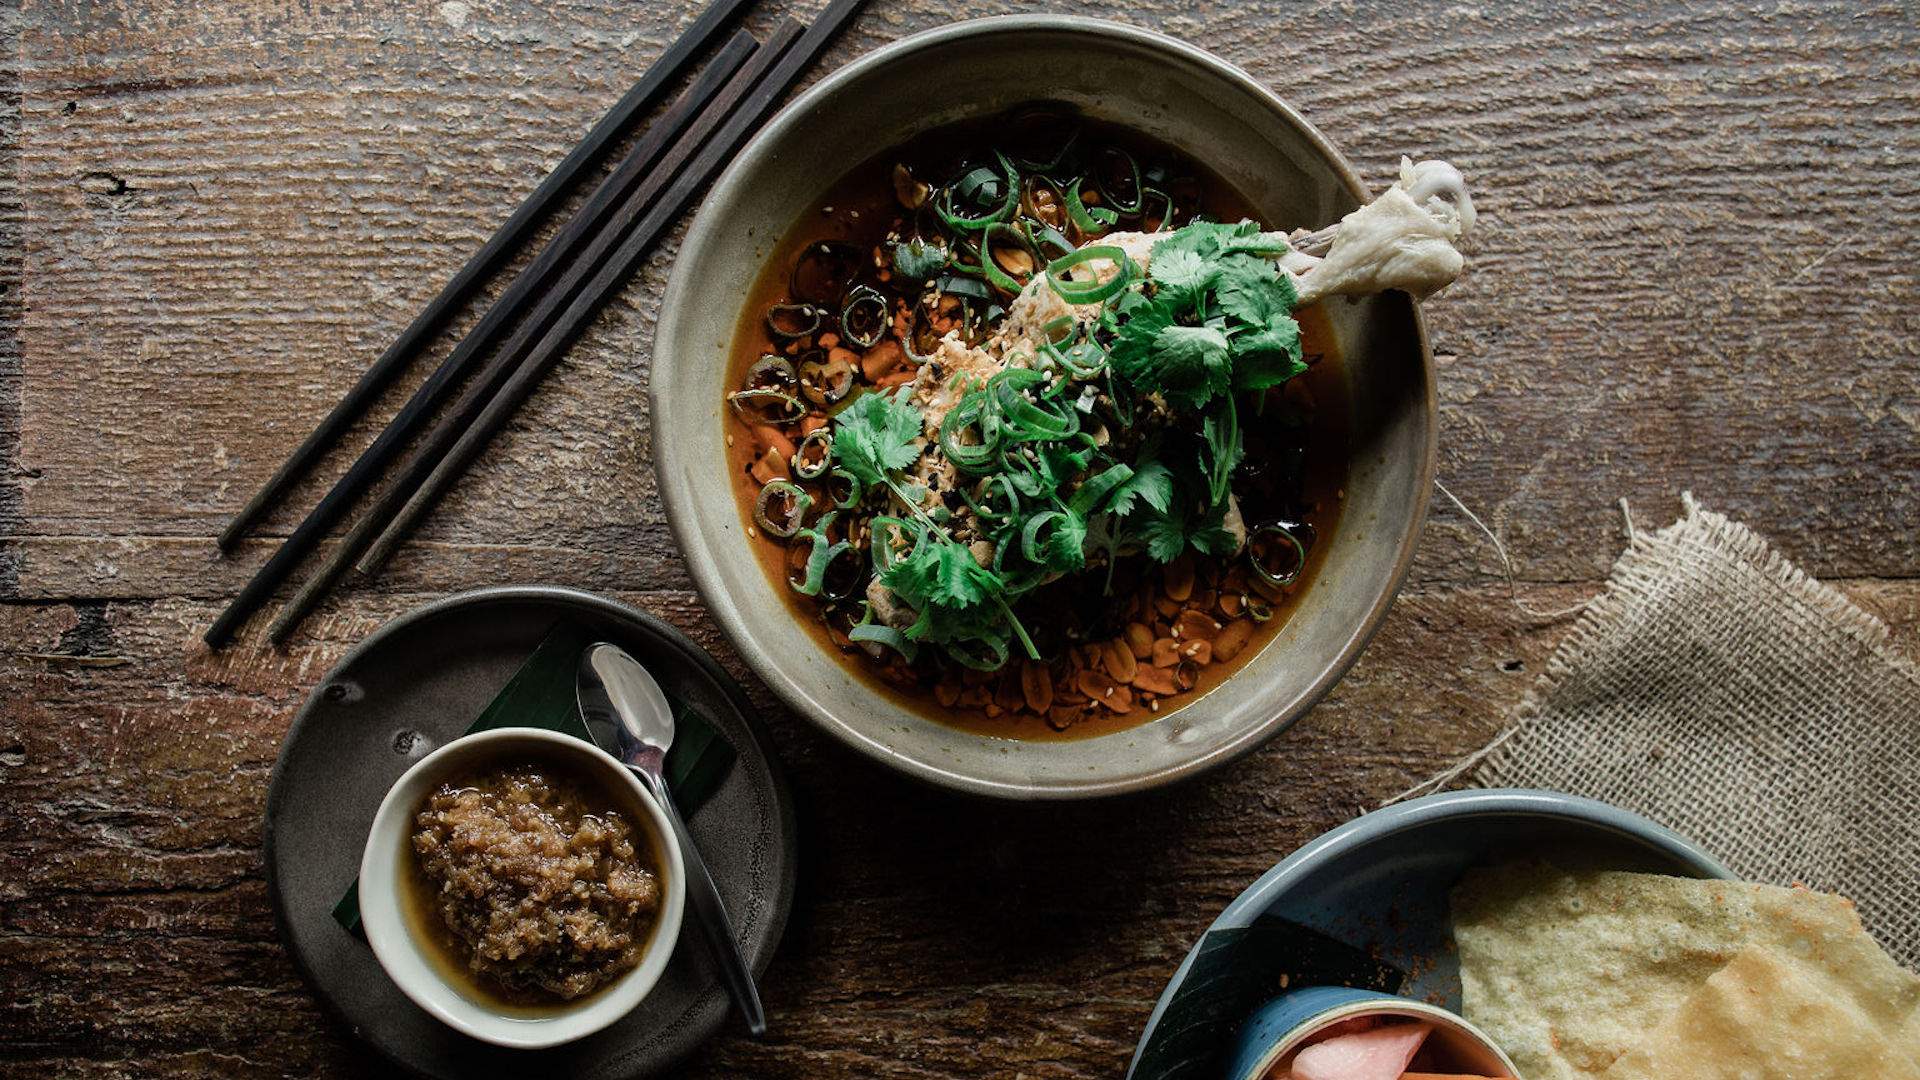 Ghost Street Is a Soon-to-Open Chinese Restaurant From the Cafe Hanoi Team